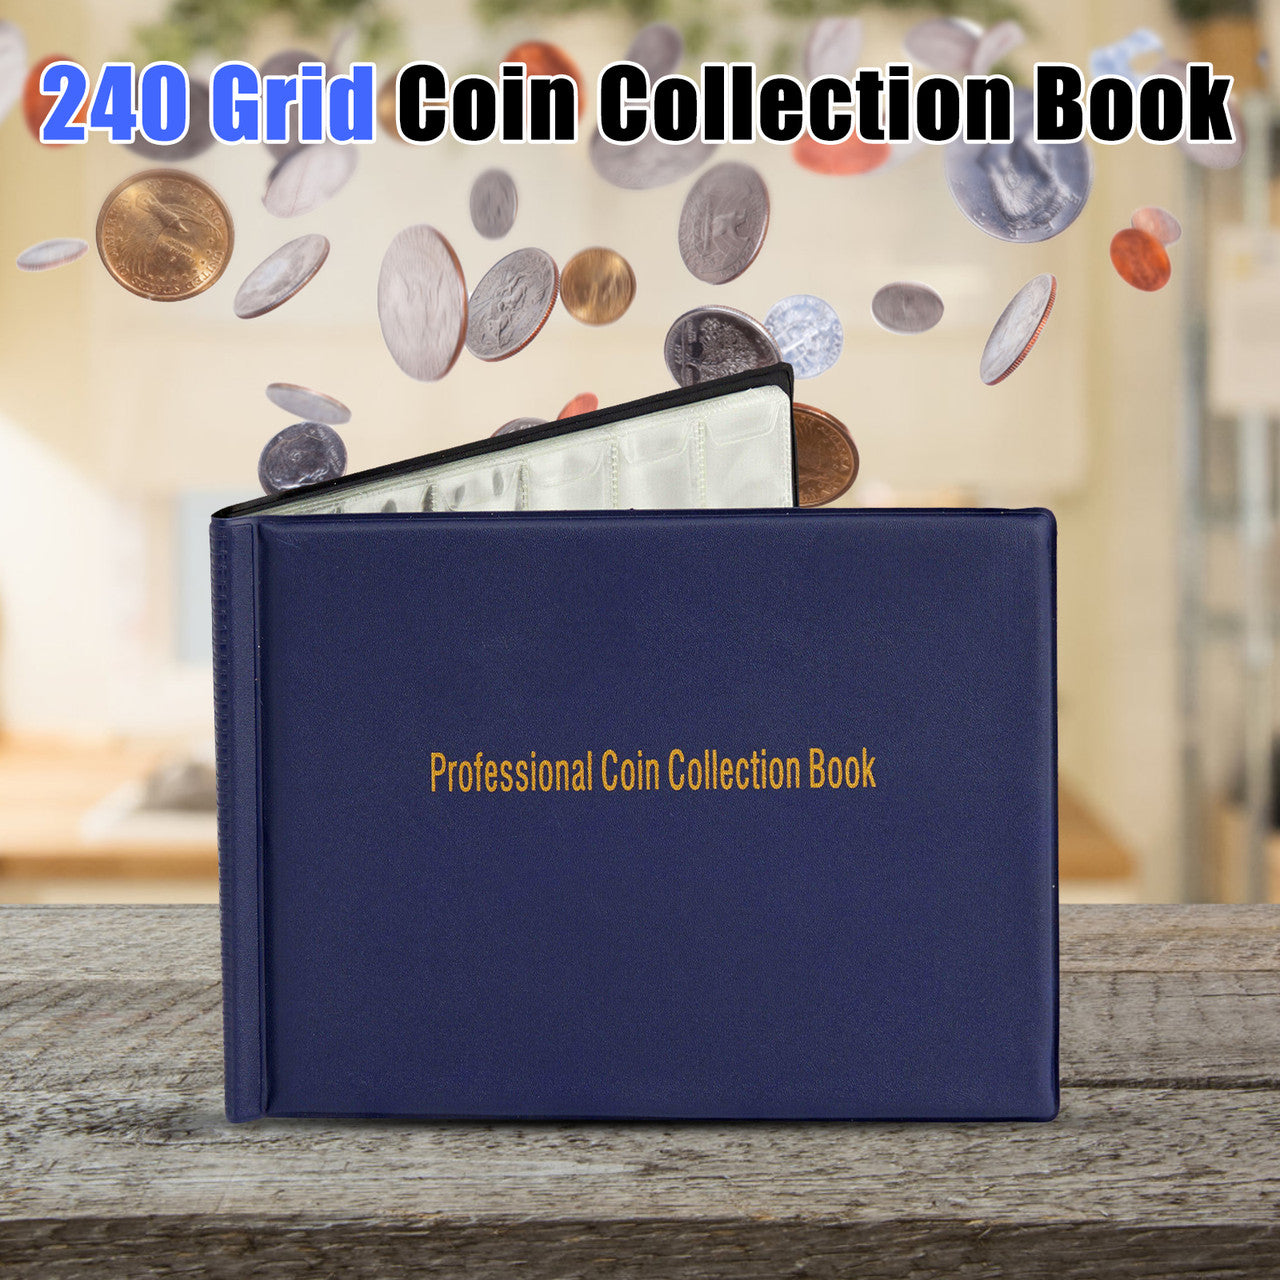 240 Pockets Coin Collection Book - Coin Grid Measures Approximately 1.26" X 1.18" Collectible Pennies, Quarters, Dimes and More (Dark Blue)